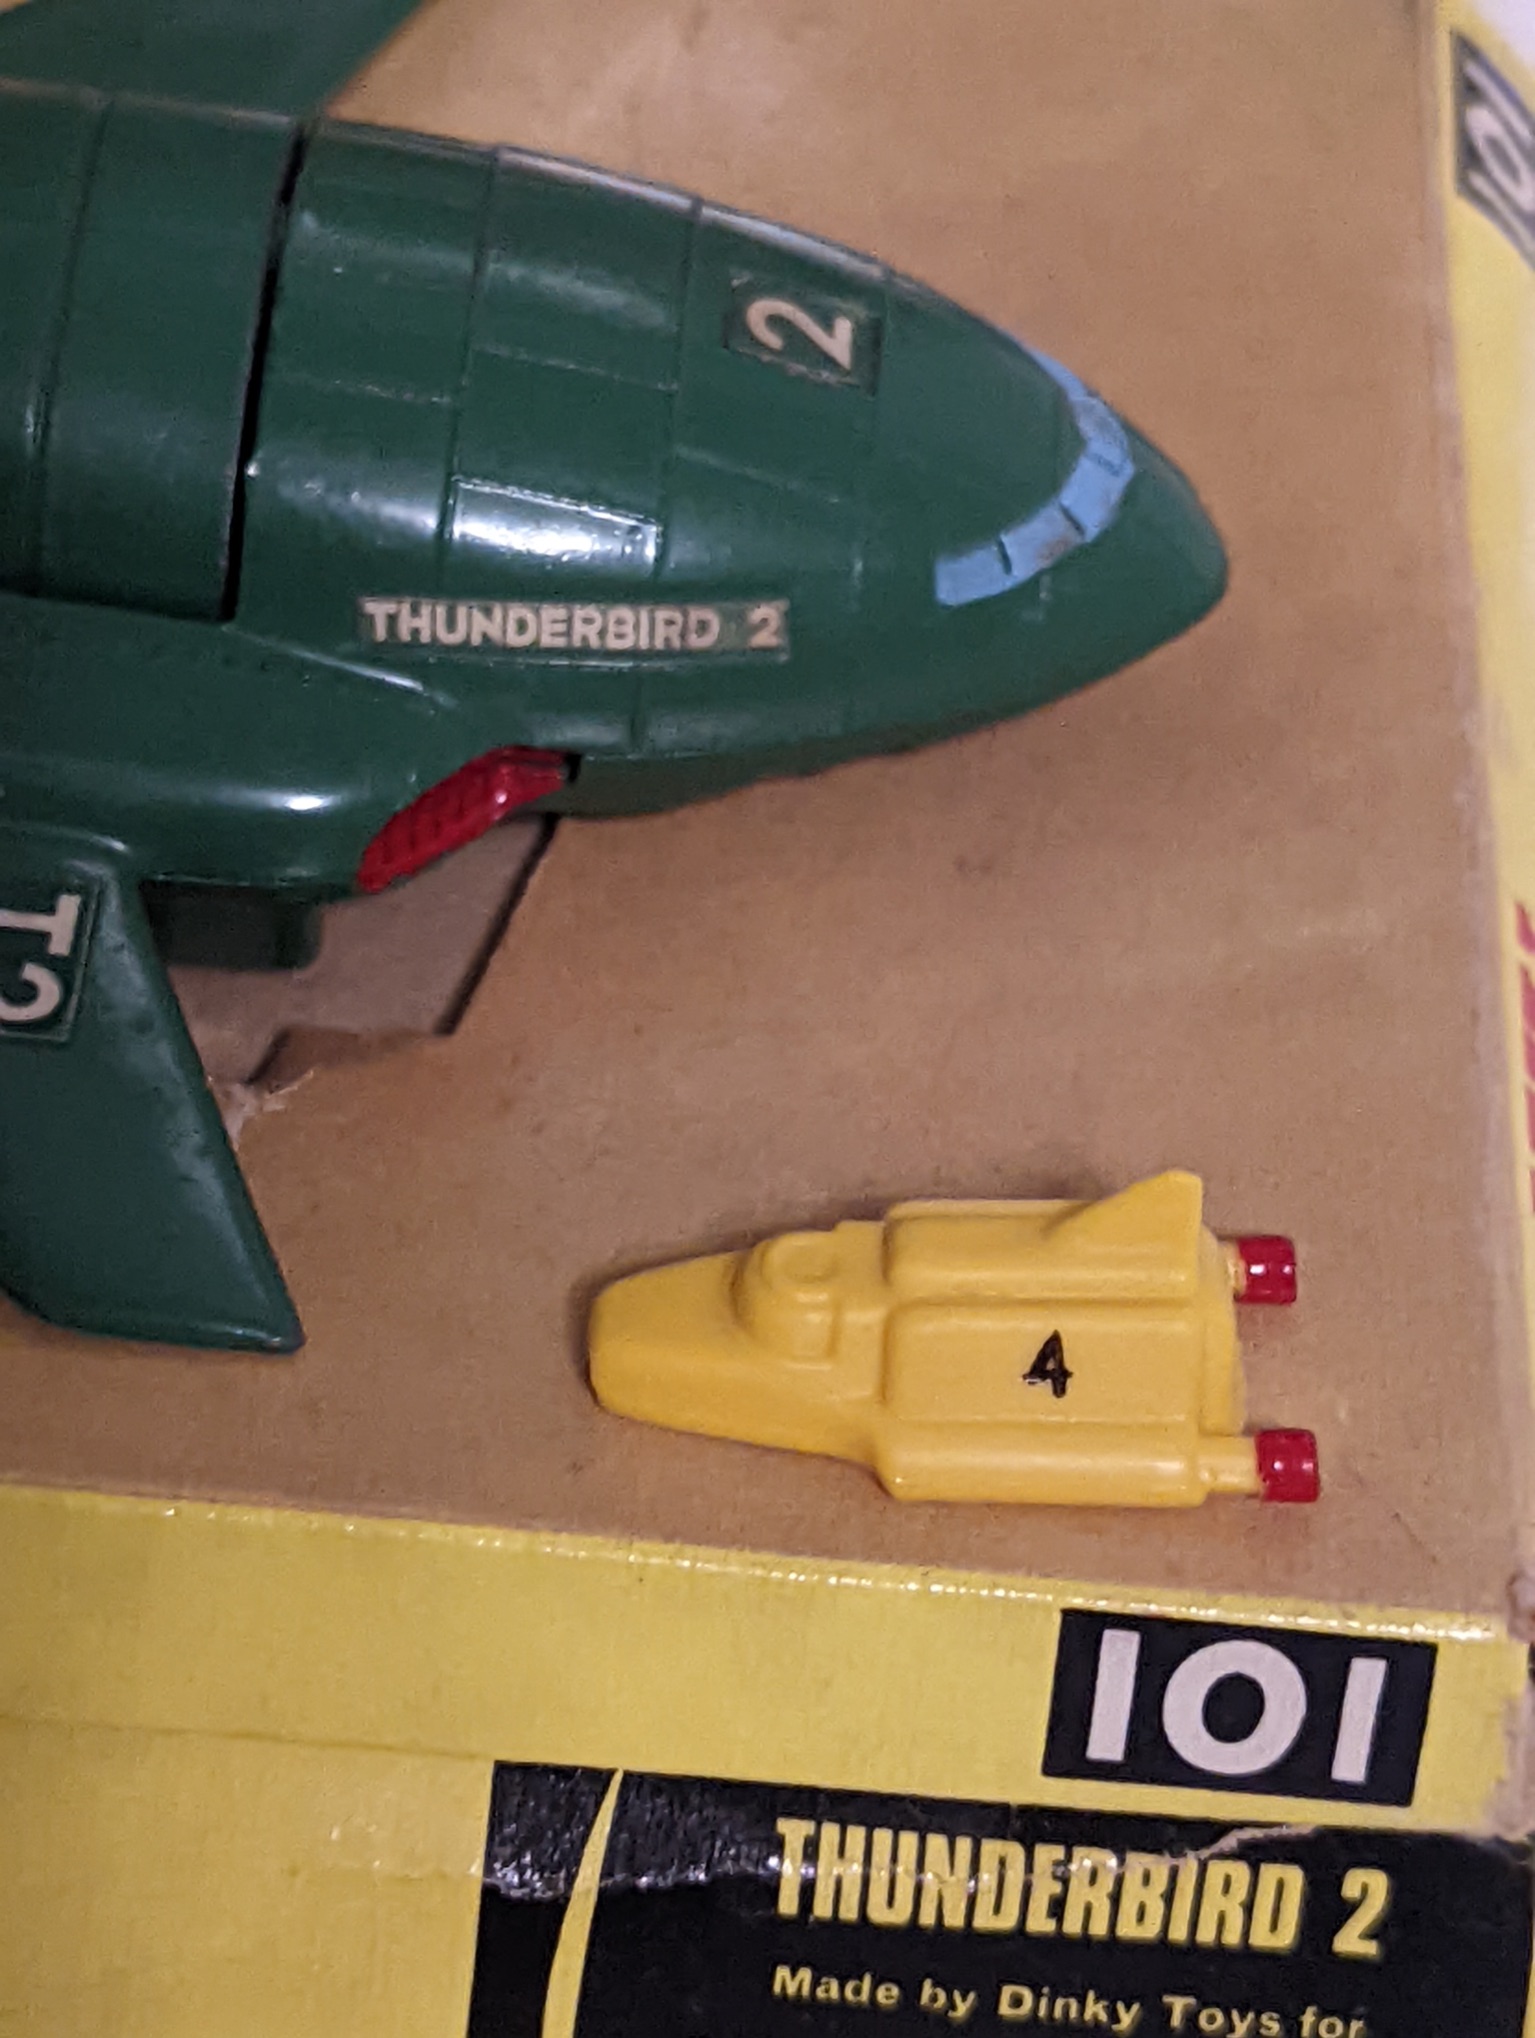 Dinky Toys No.101 Thunderbird 2, comprising of green body with four yellow plastic legs and red rear - Image 3 of 3